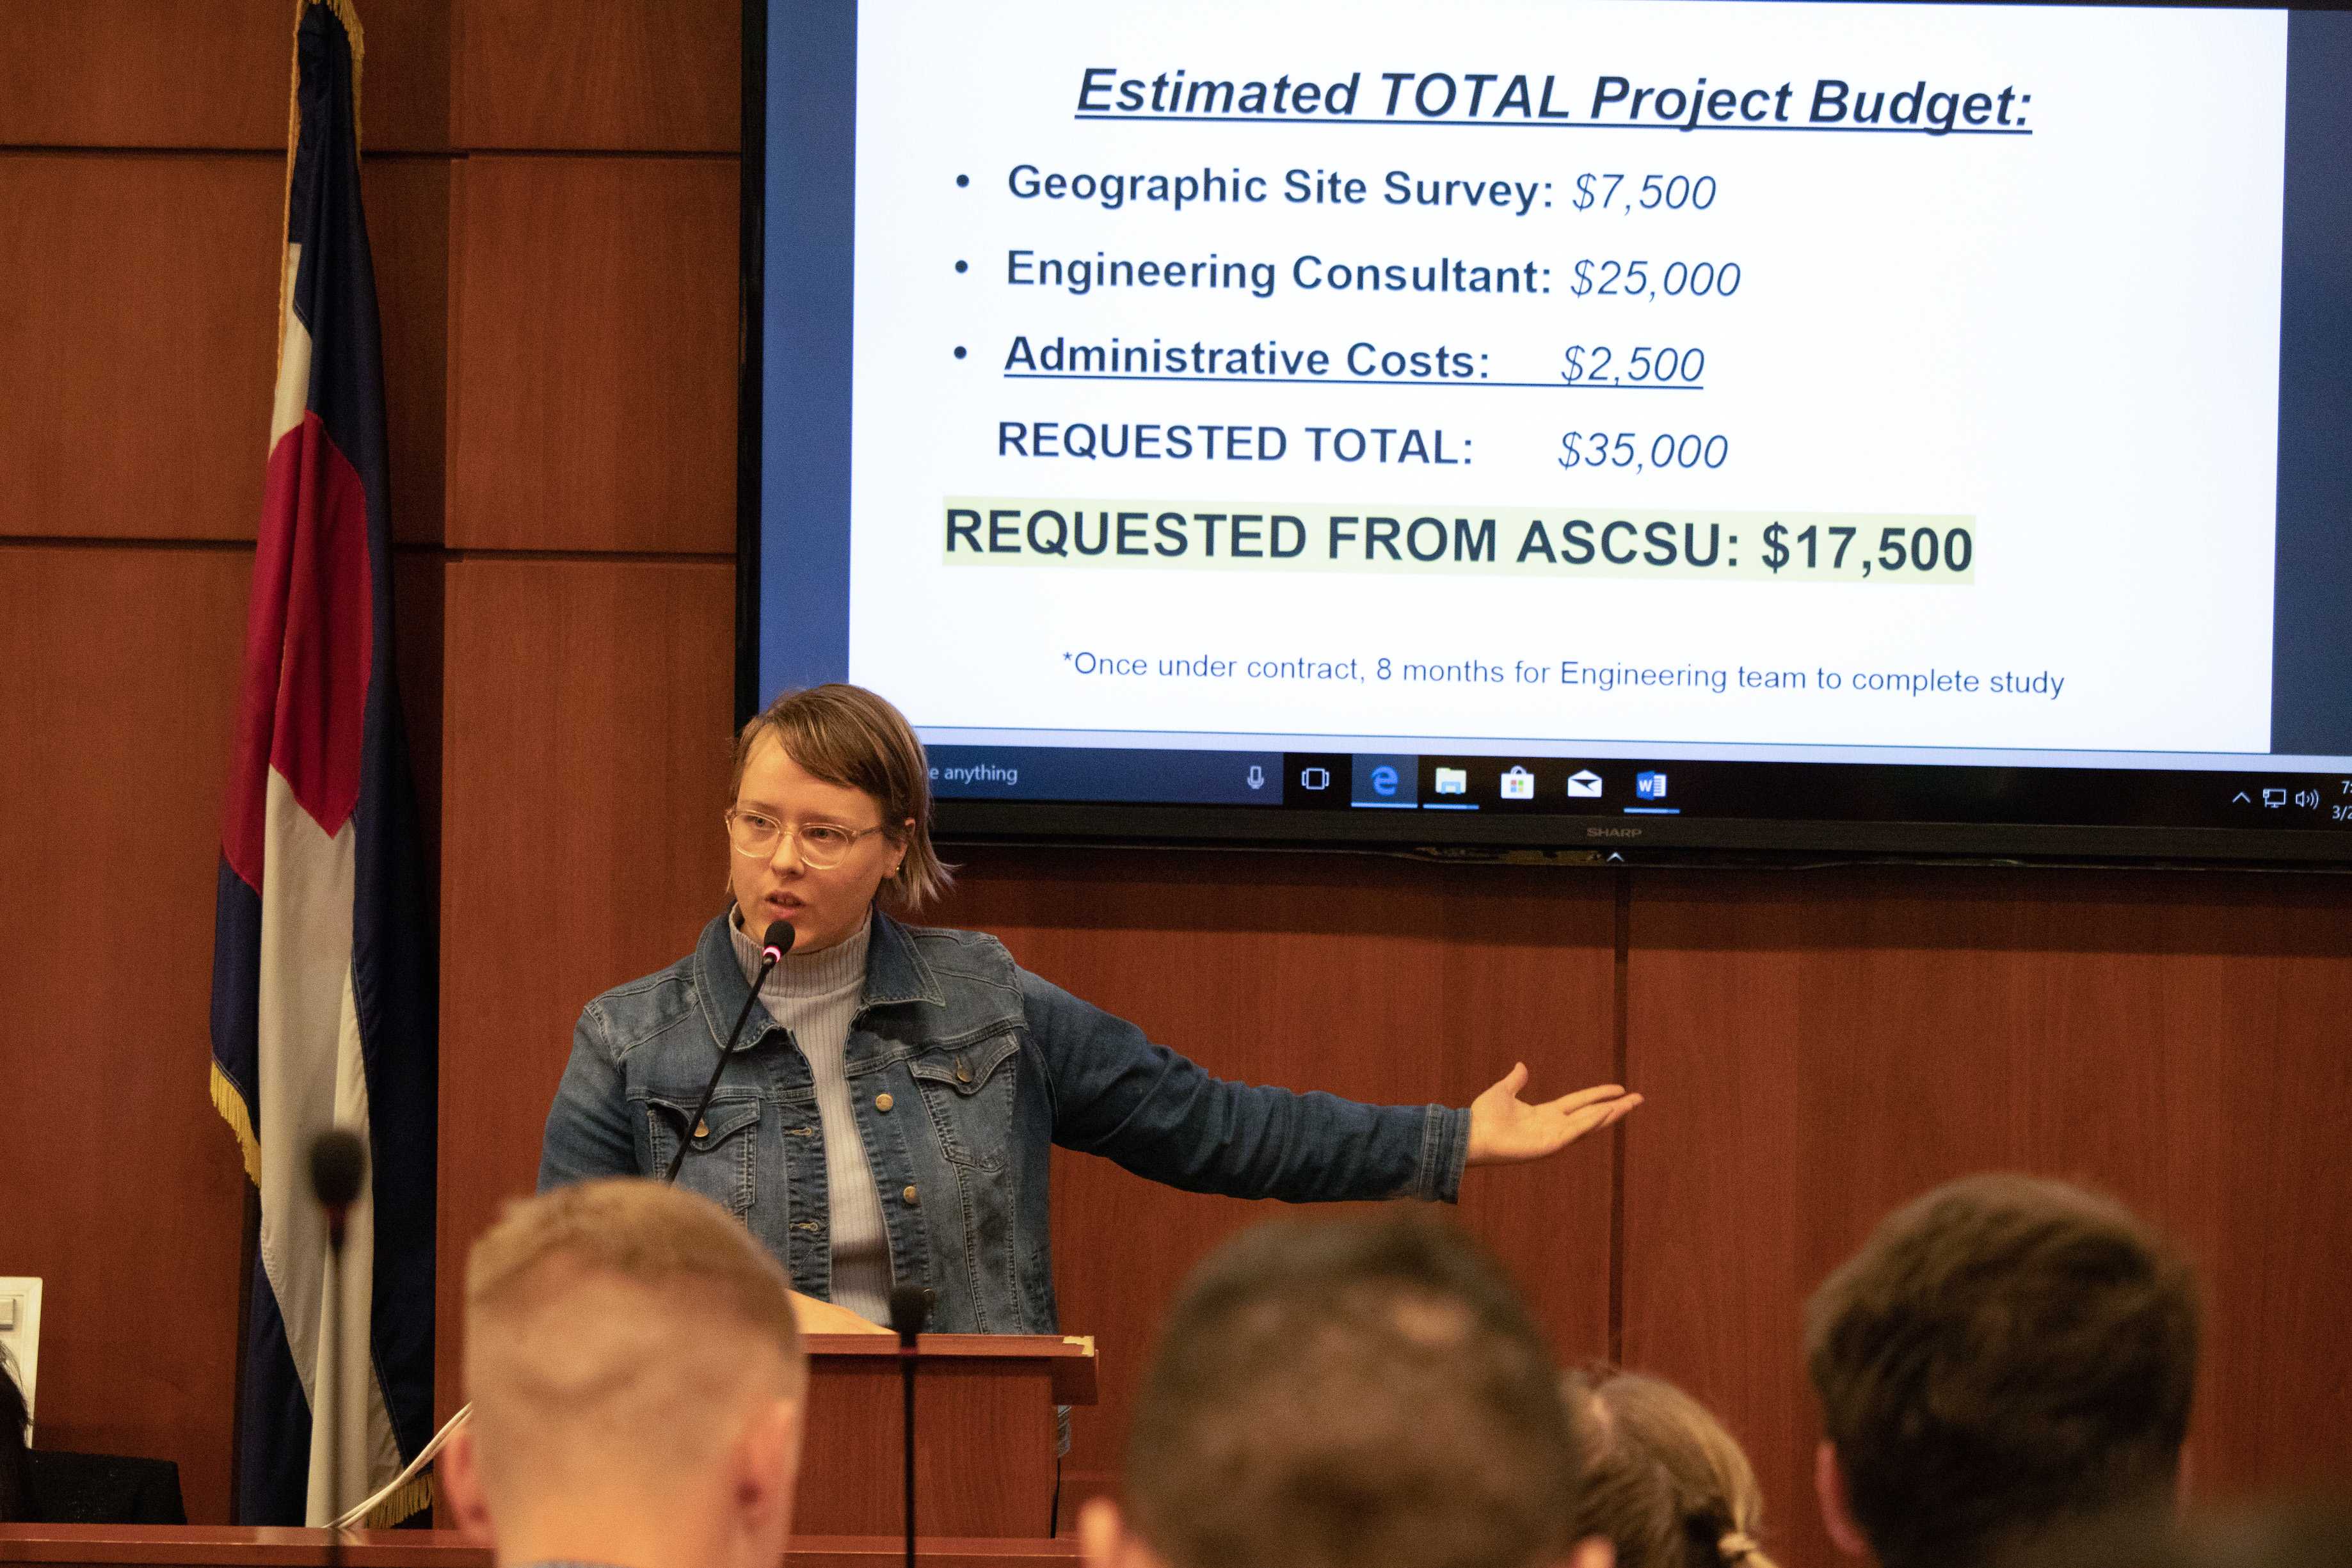 woman stands in front of powerpoint that says: "Estimated Total Project Budget: Geographic Site survey: $7,500; Engineering consultant: $25,000; Administrative costs: $2,500; Requested total: $35,000; Requested from ASCSU: $17,500